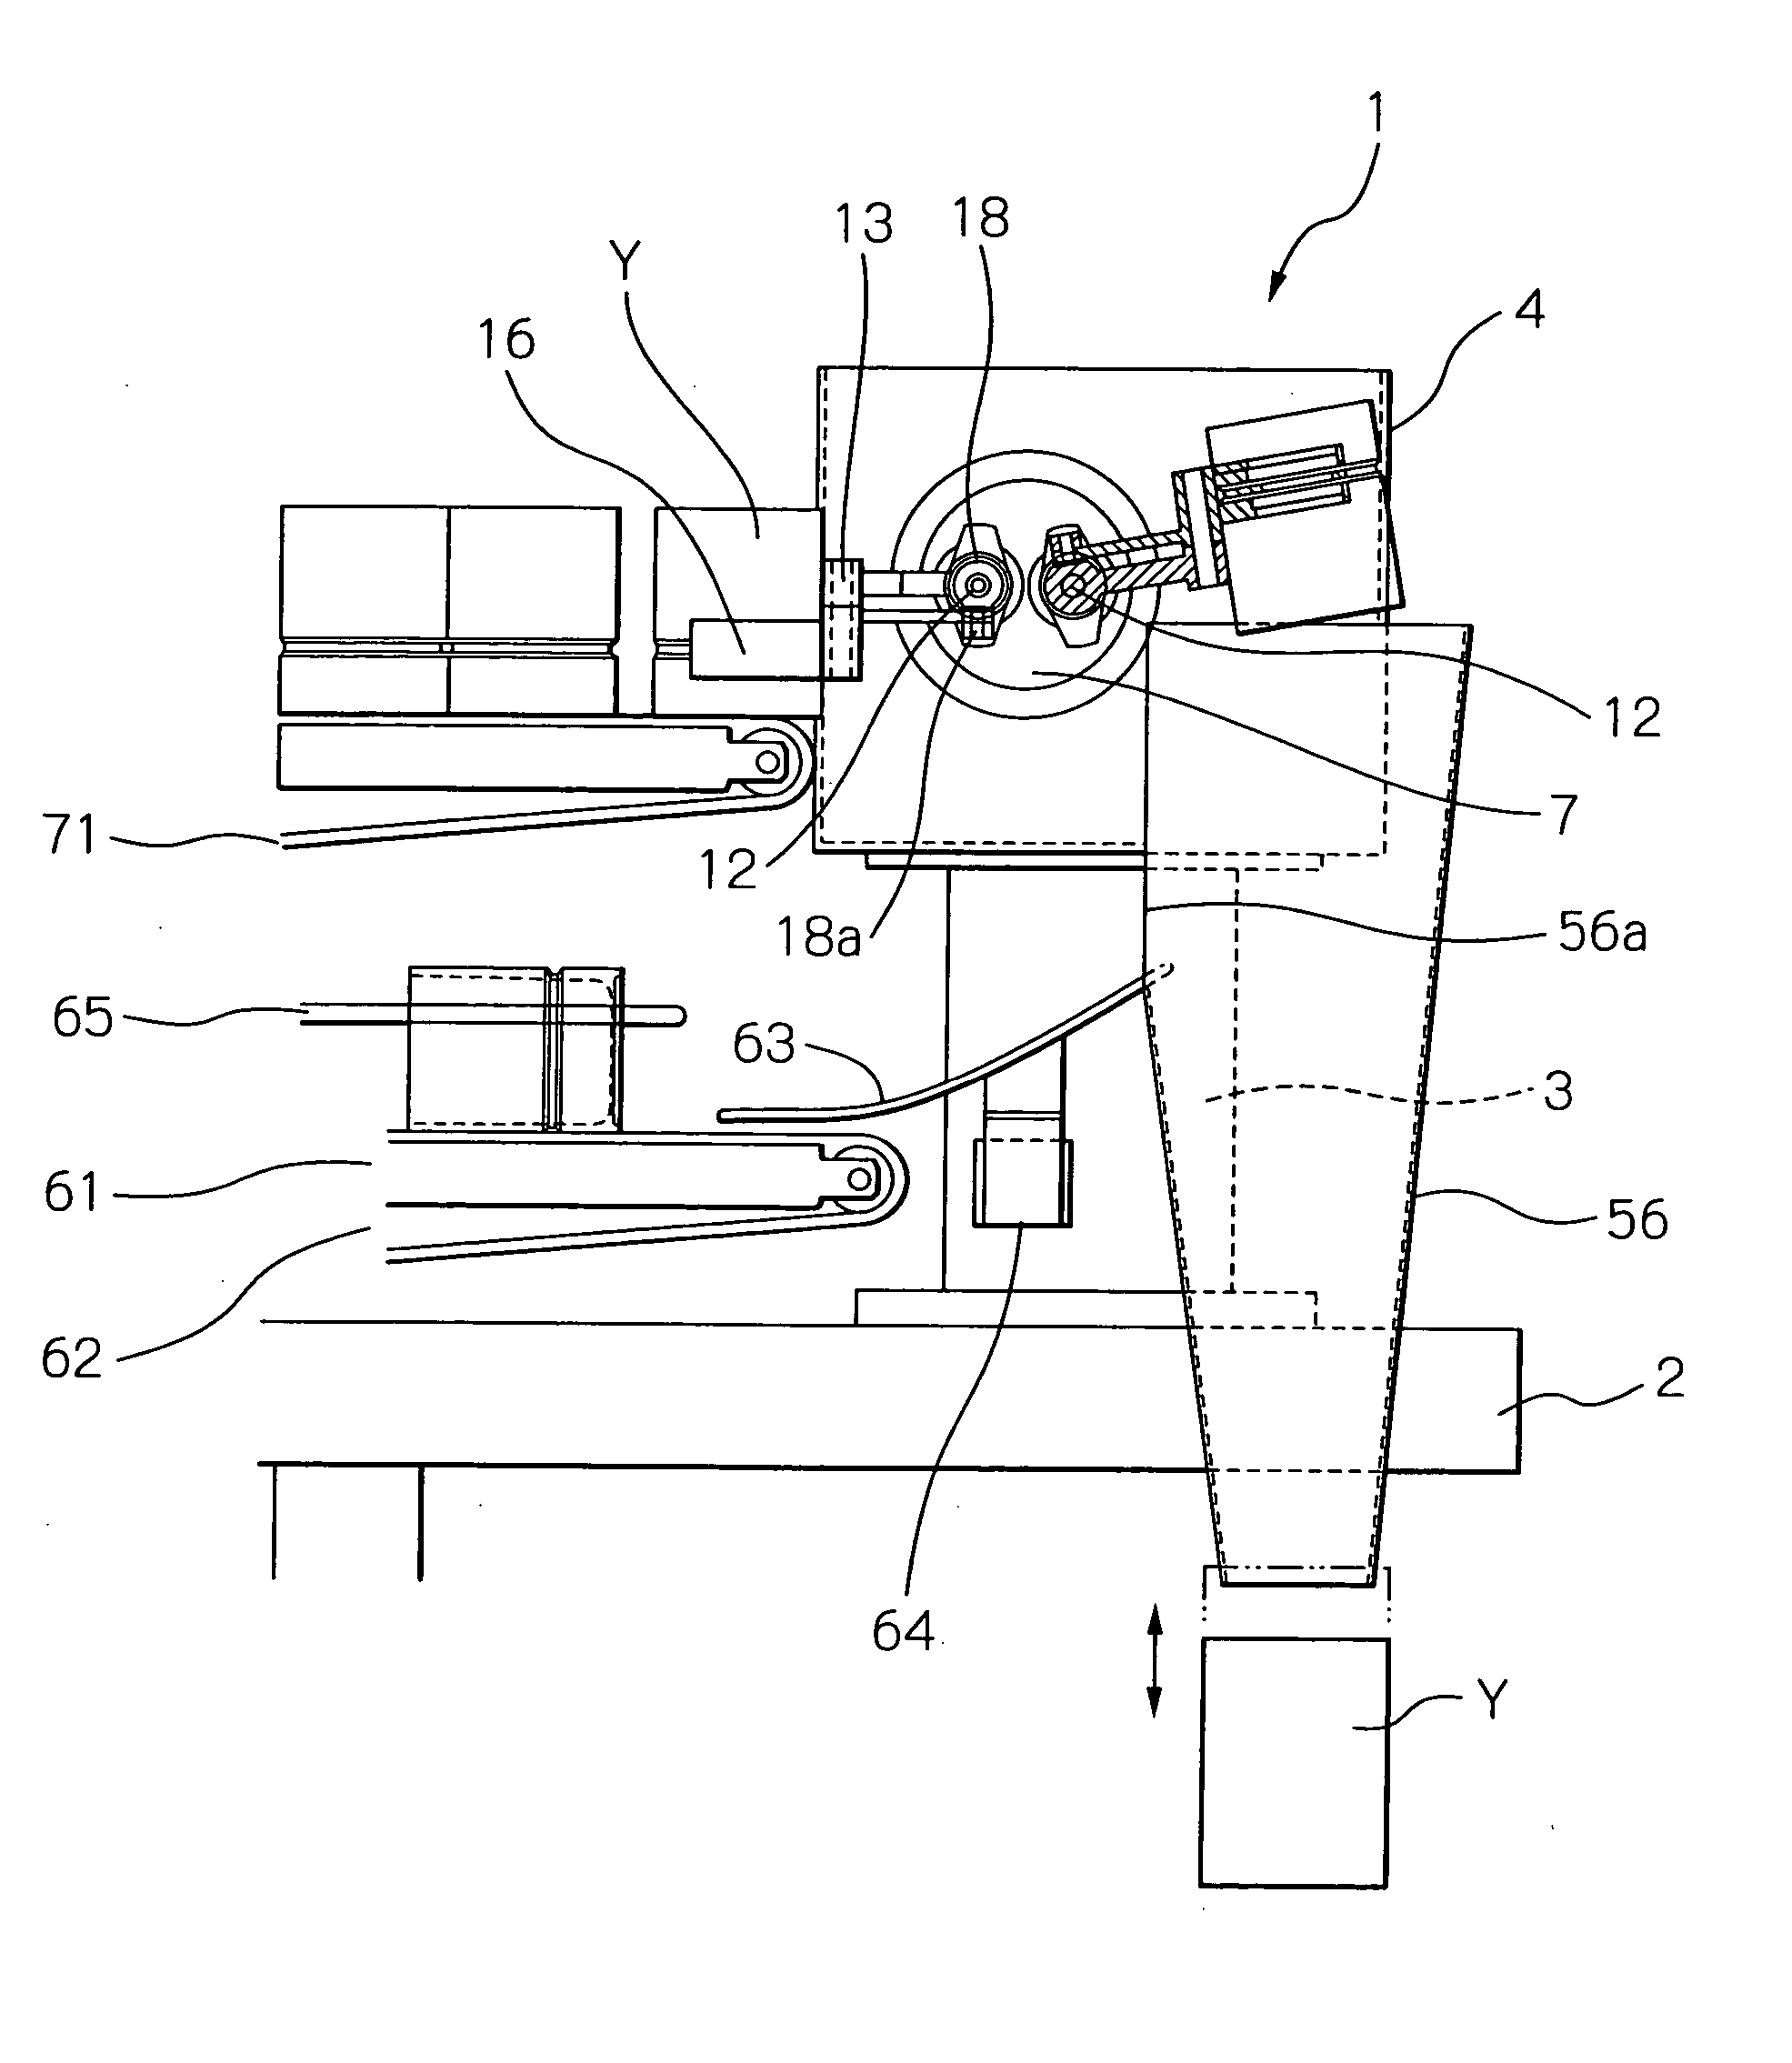 Contents-filling vessel reversing apparatus and a vessel for use with the apparatus